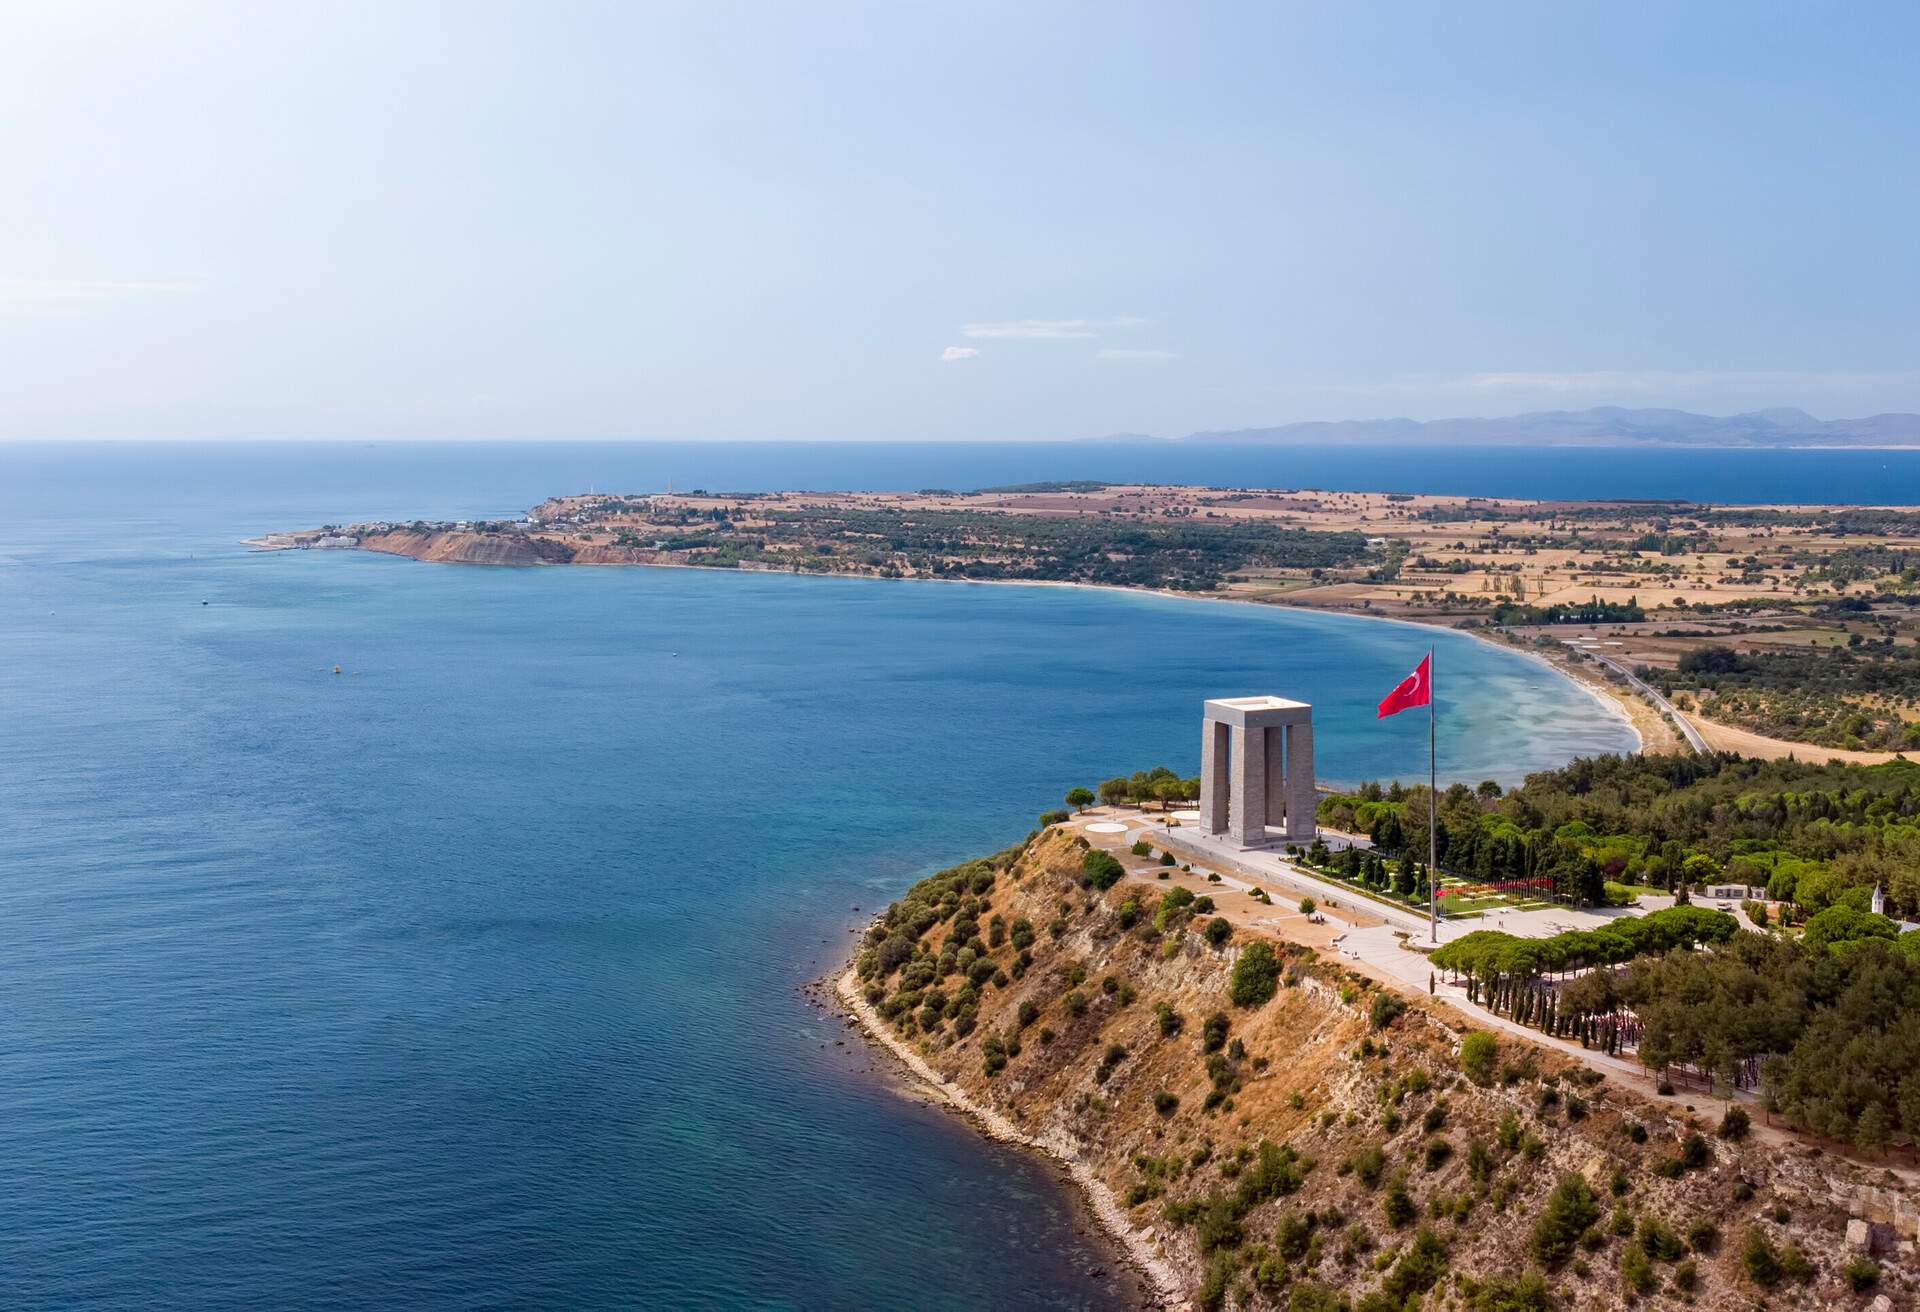 Gallipoli peninsula, where Canakkale land and sea battles took place during the first world war. Martyrs monument and Anzac Cove. Photo shoot with drone.